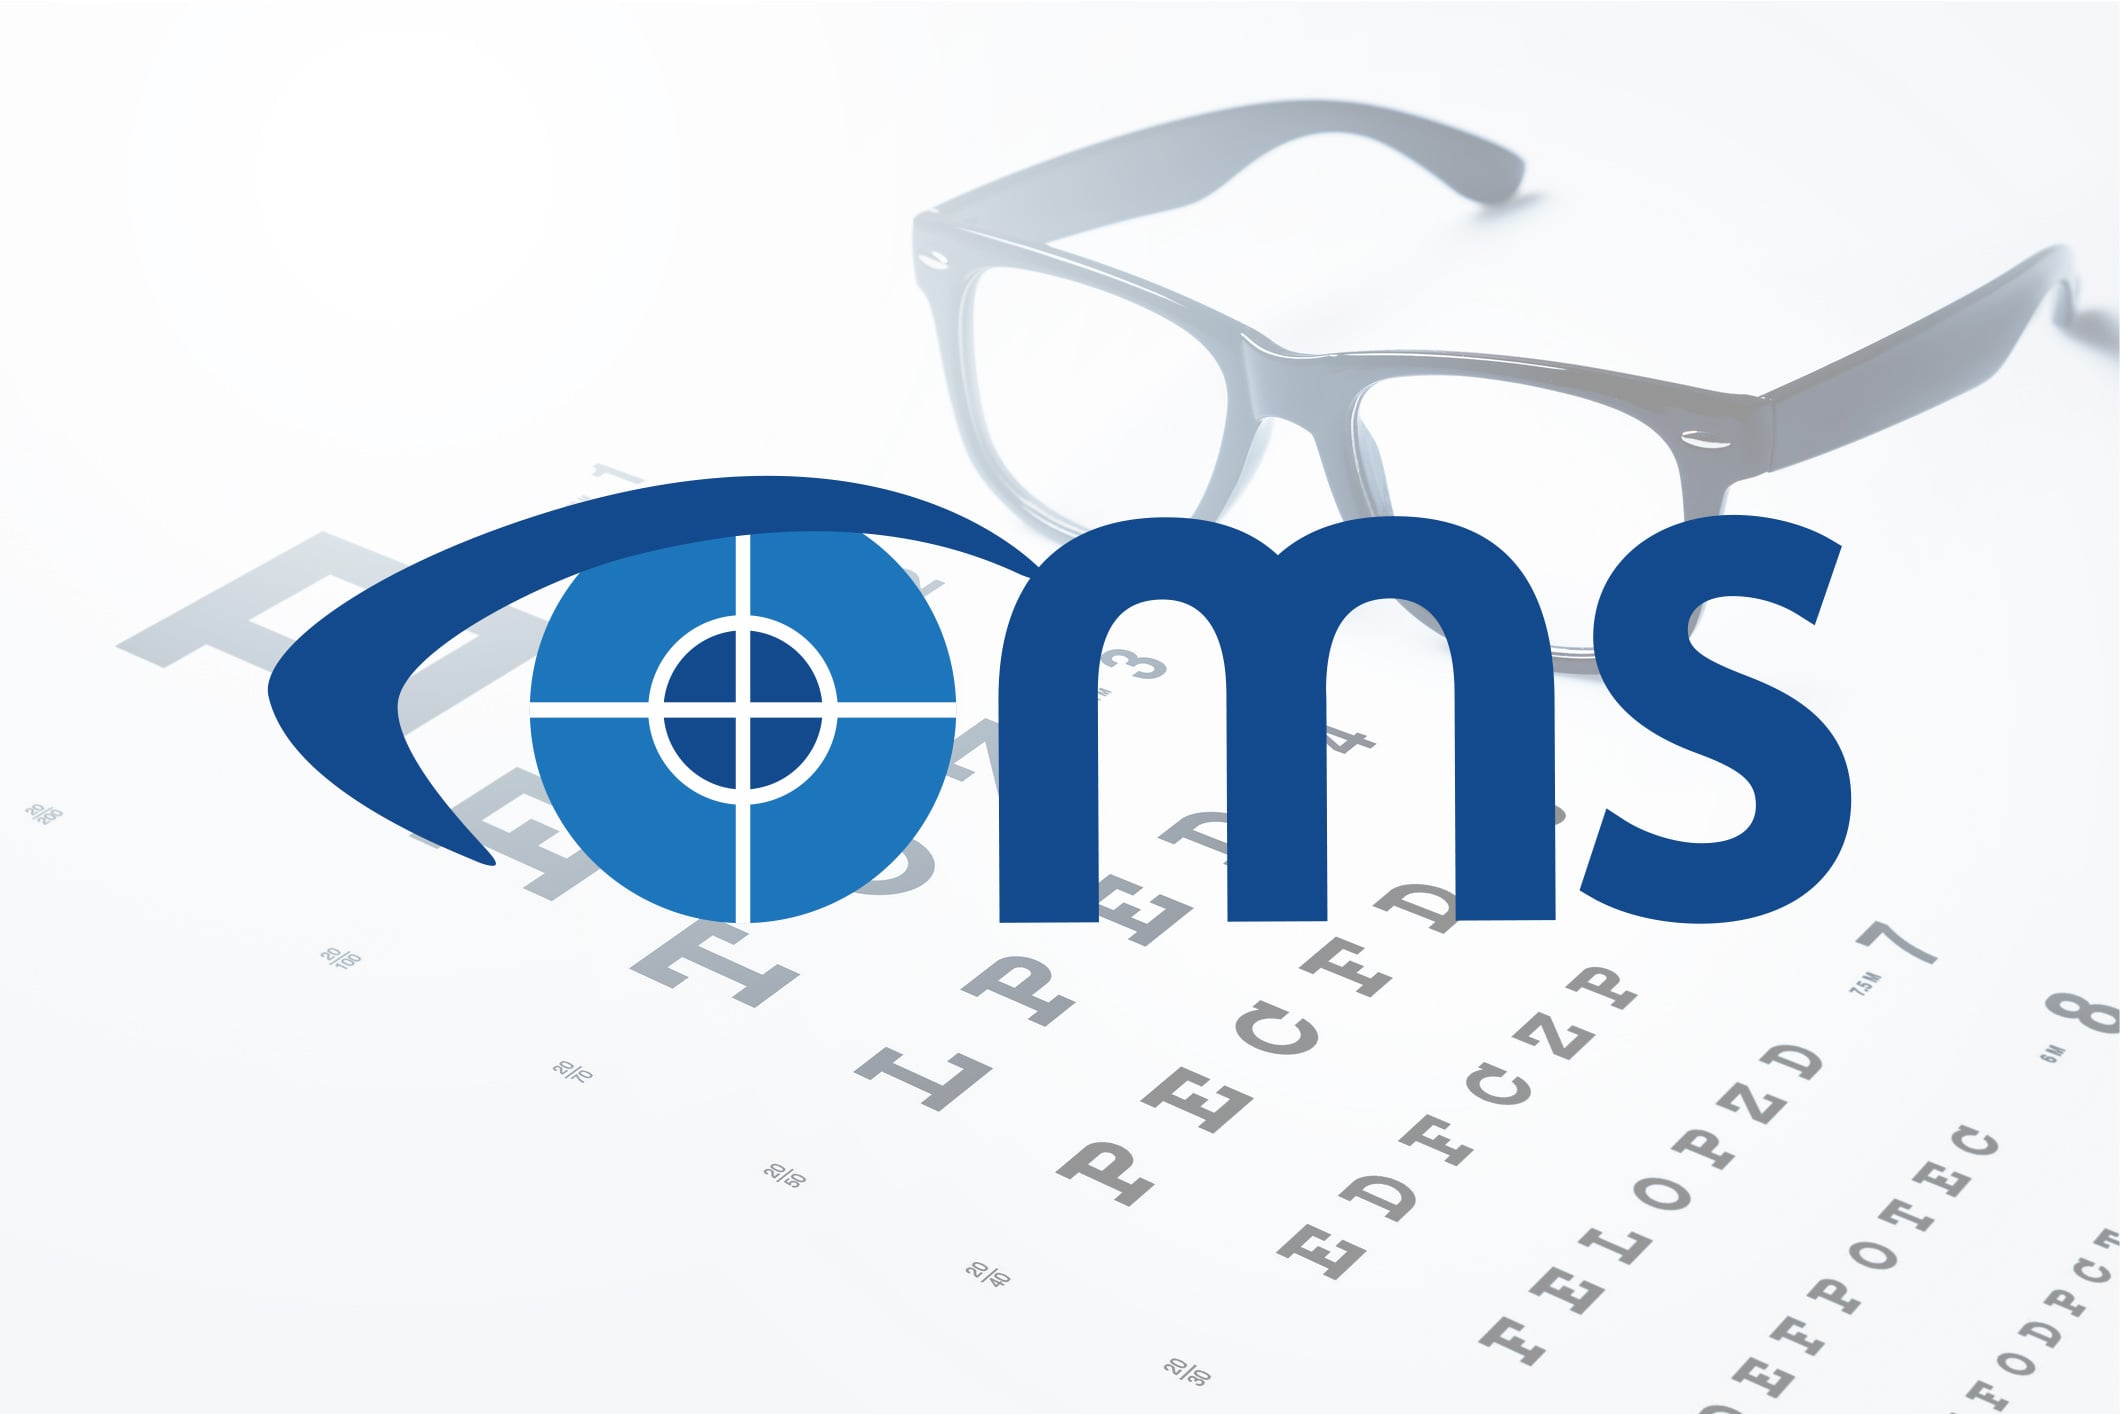 Founded in 2004, we’ve spent over 20 years  serving eyecare practices of all shapes and sizes.